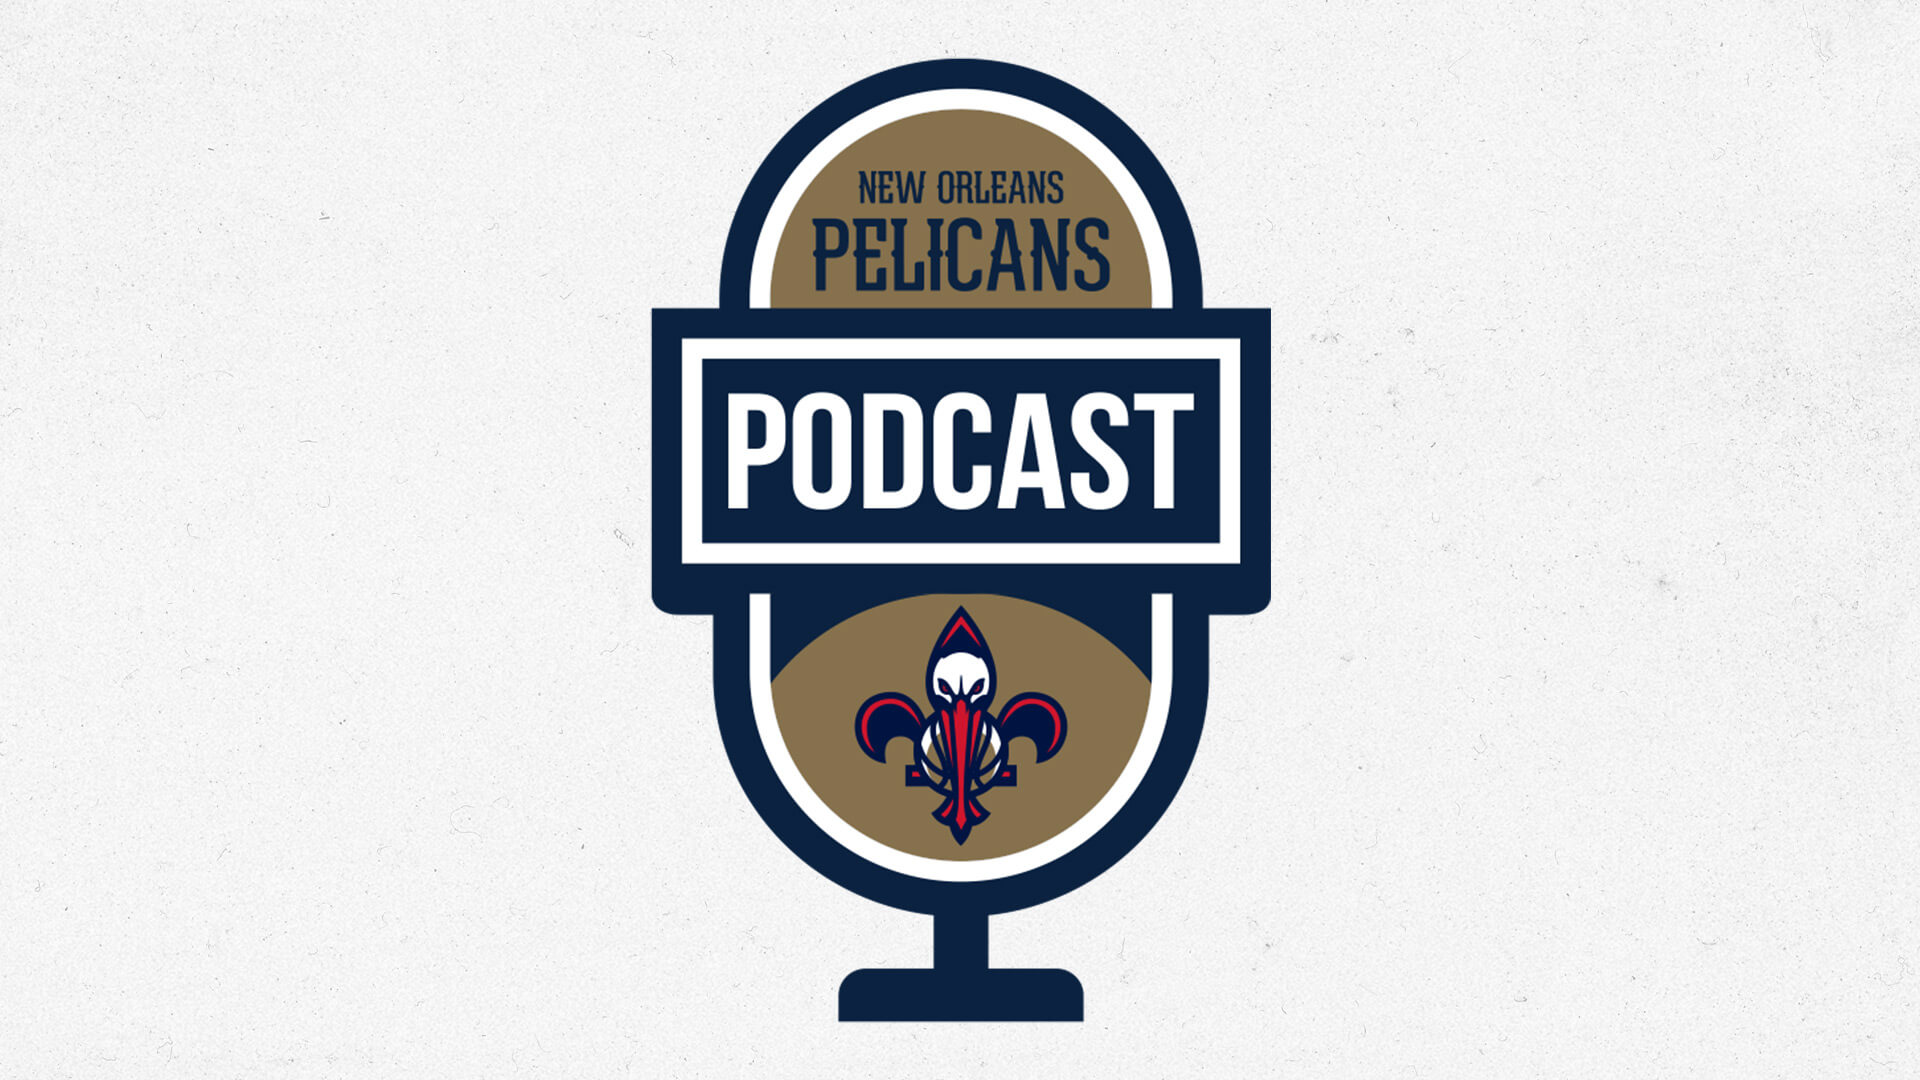 Antonio Daniels on the New Orleans Pelicans Podcast presented by SeatGeek - January 12, 2022